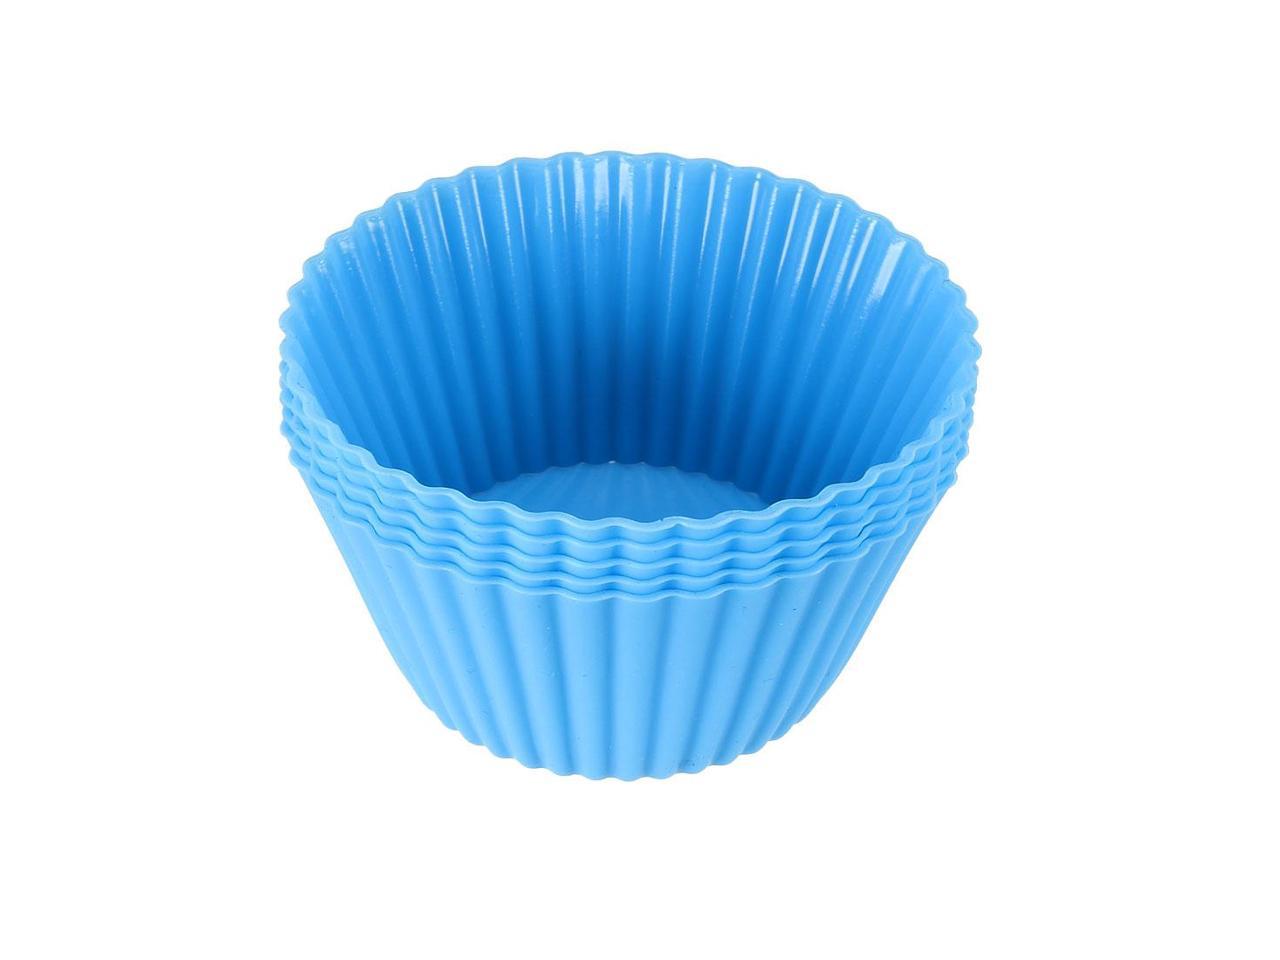 Details about   1/510 pcs Silicone Baking Cups Reusable Muffin Dessert Mold Cookie Cupcake A2P0 